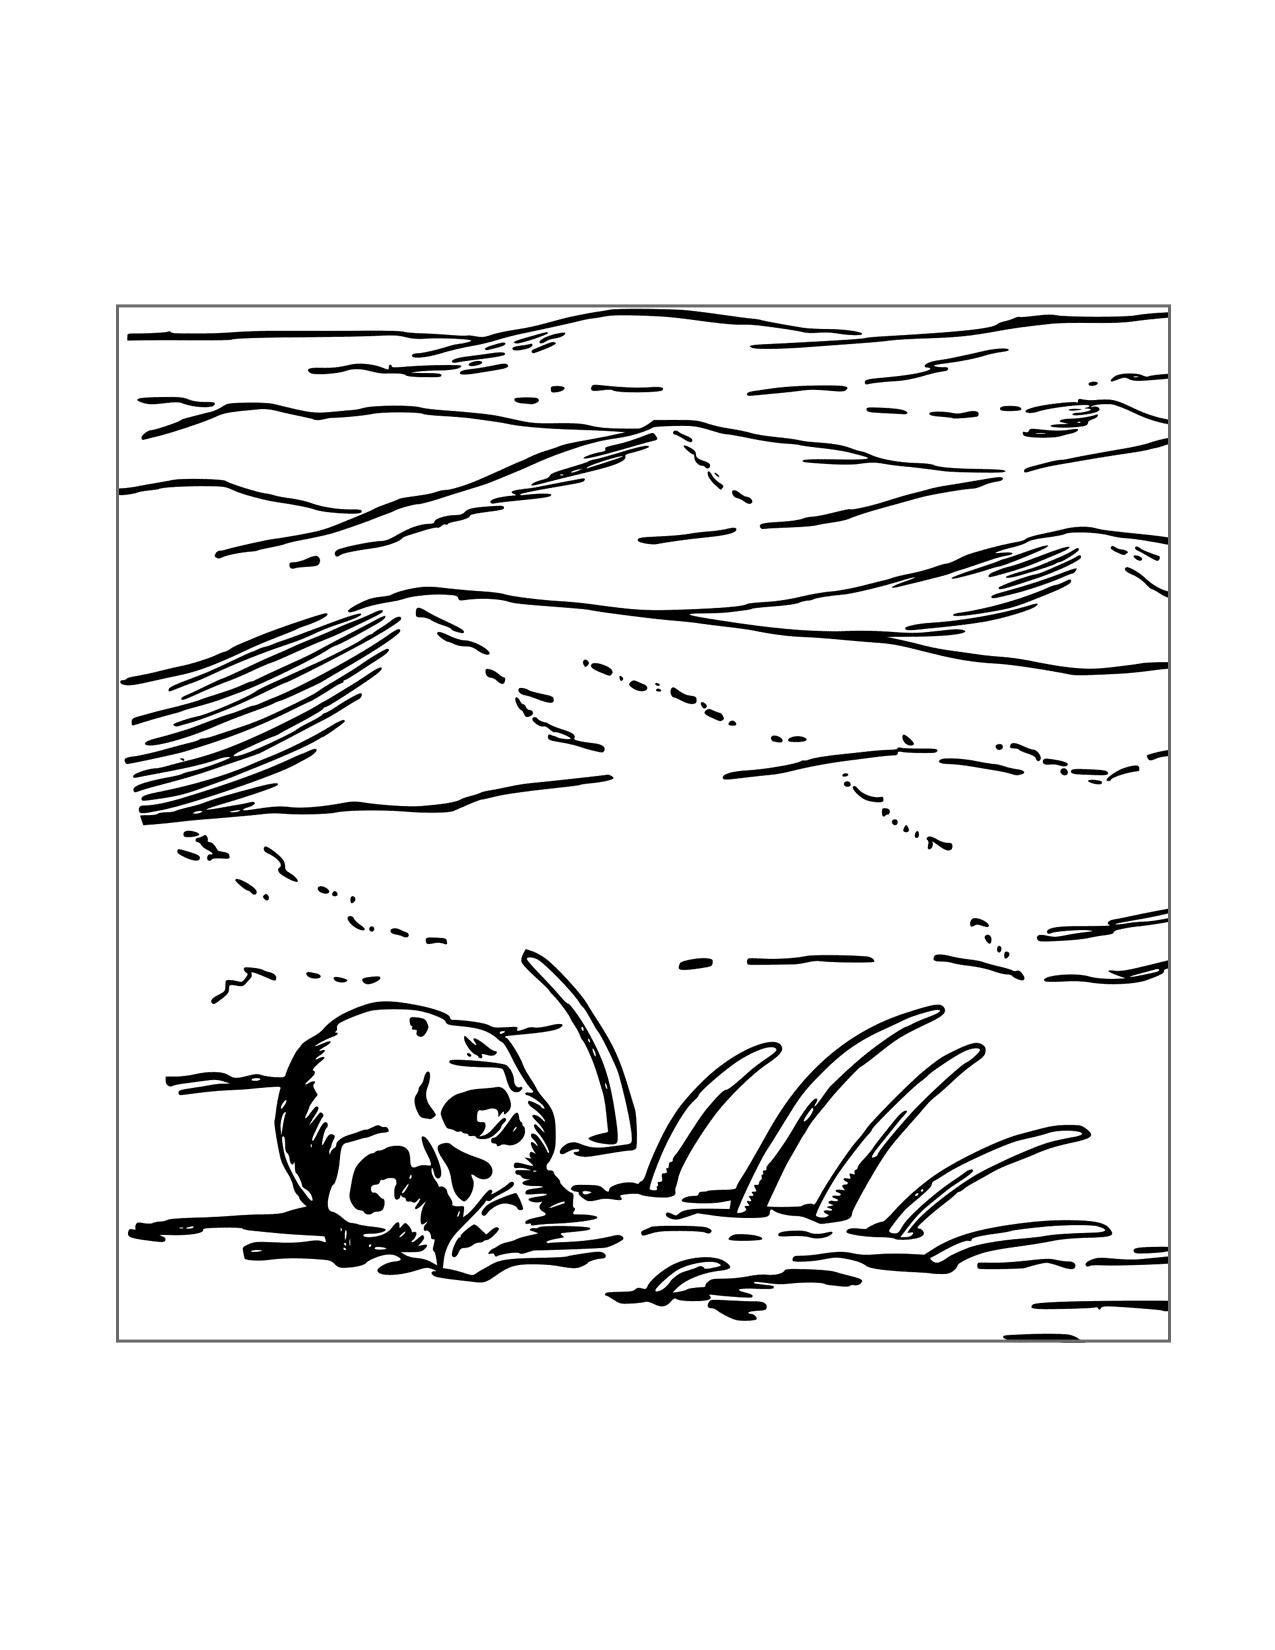 Skeleton Bones In The Sand Coloring Page